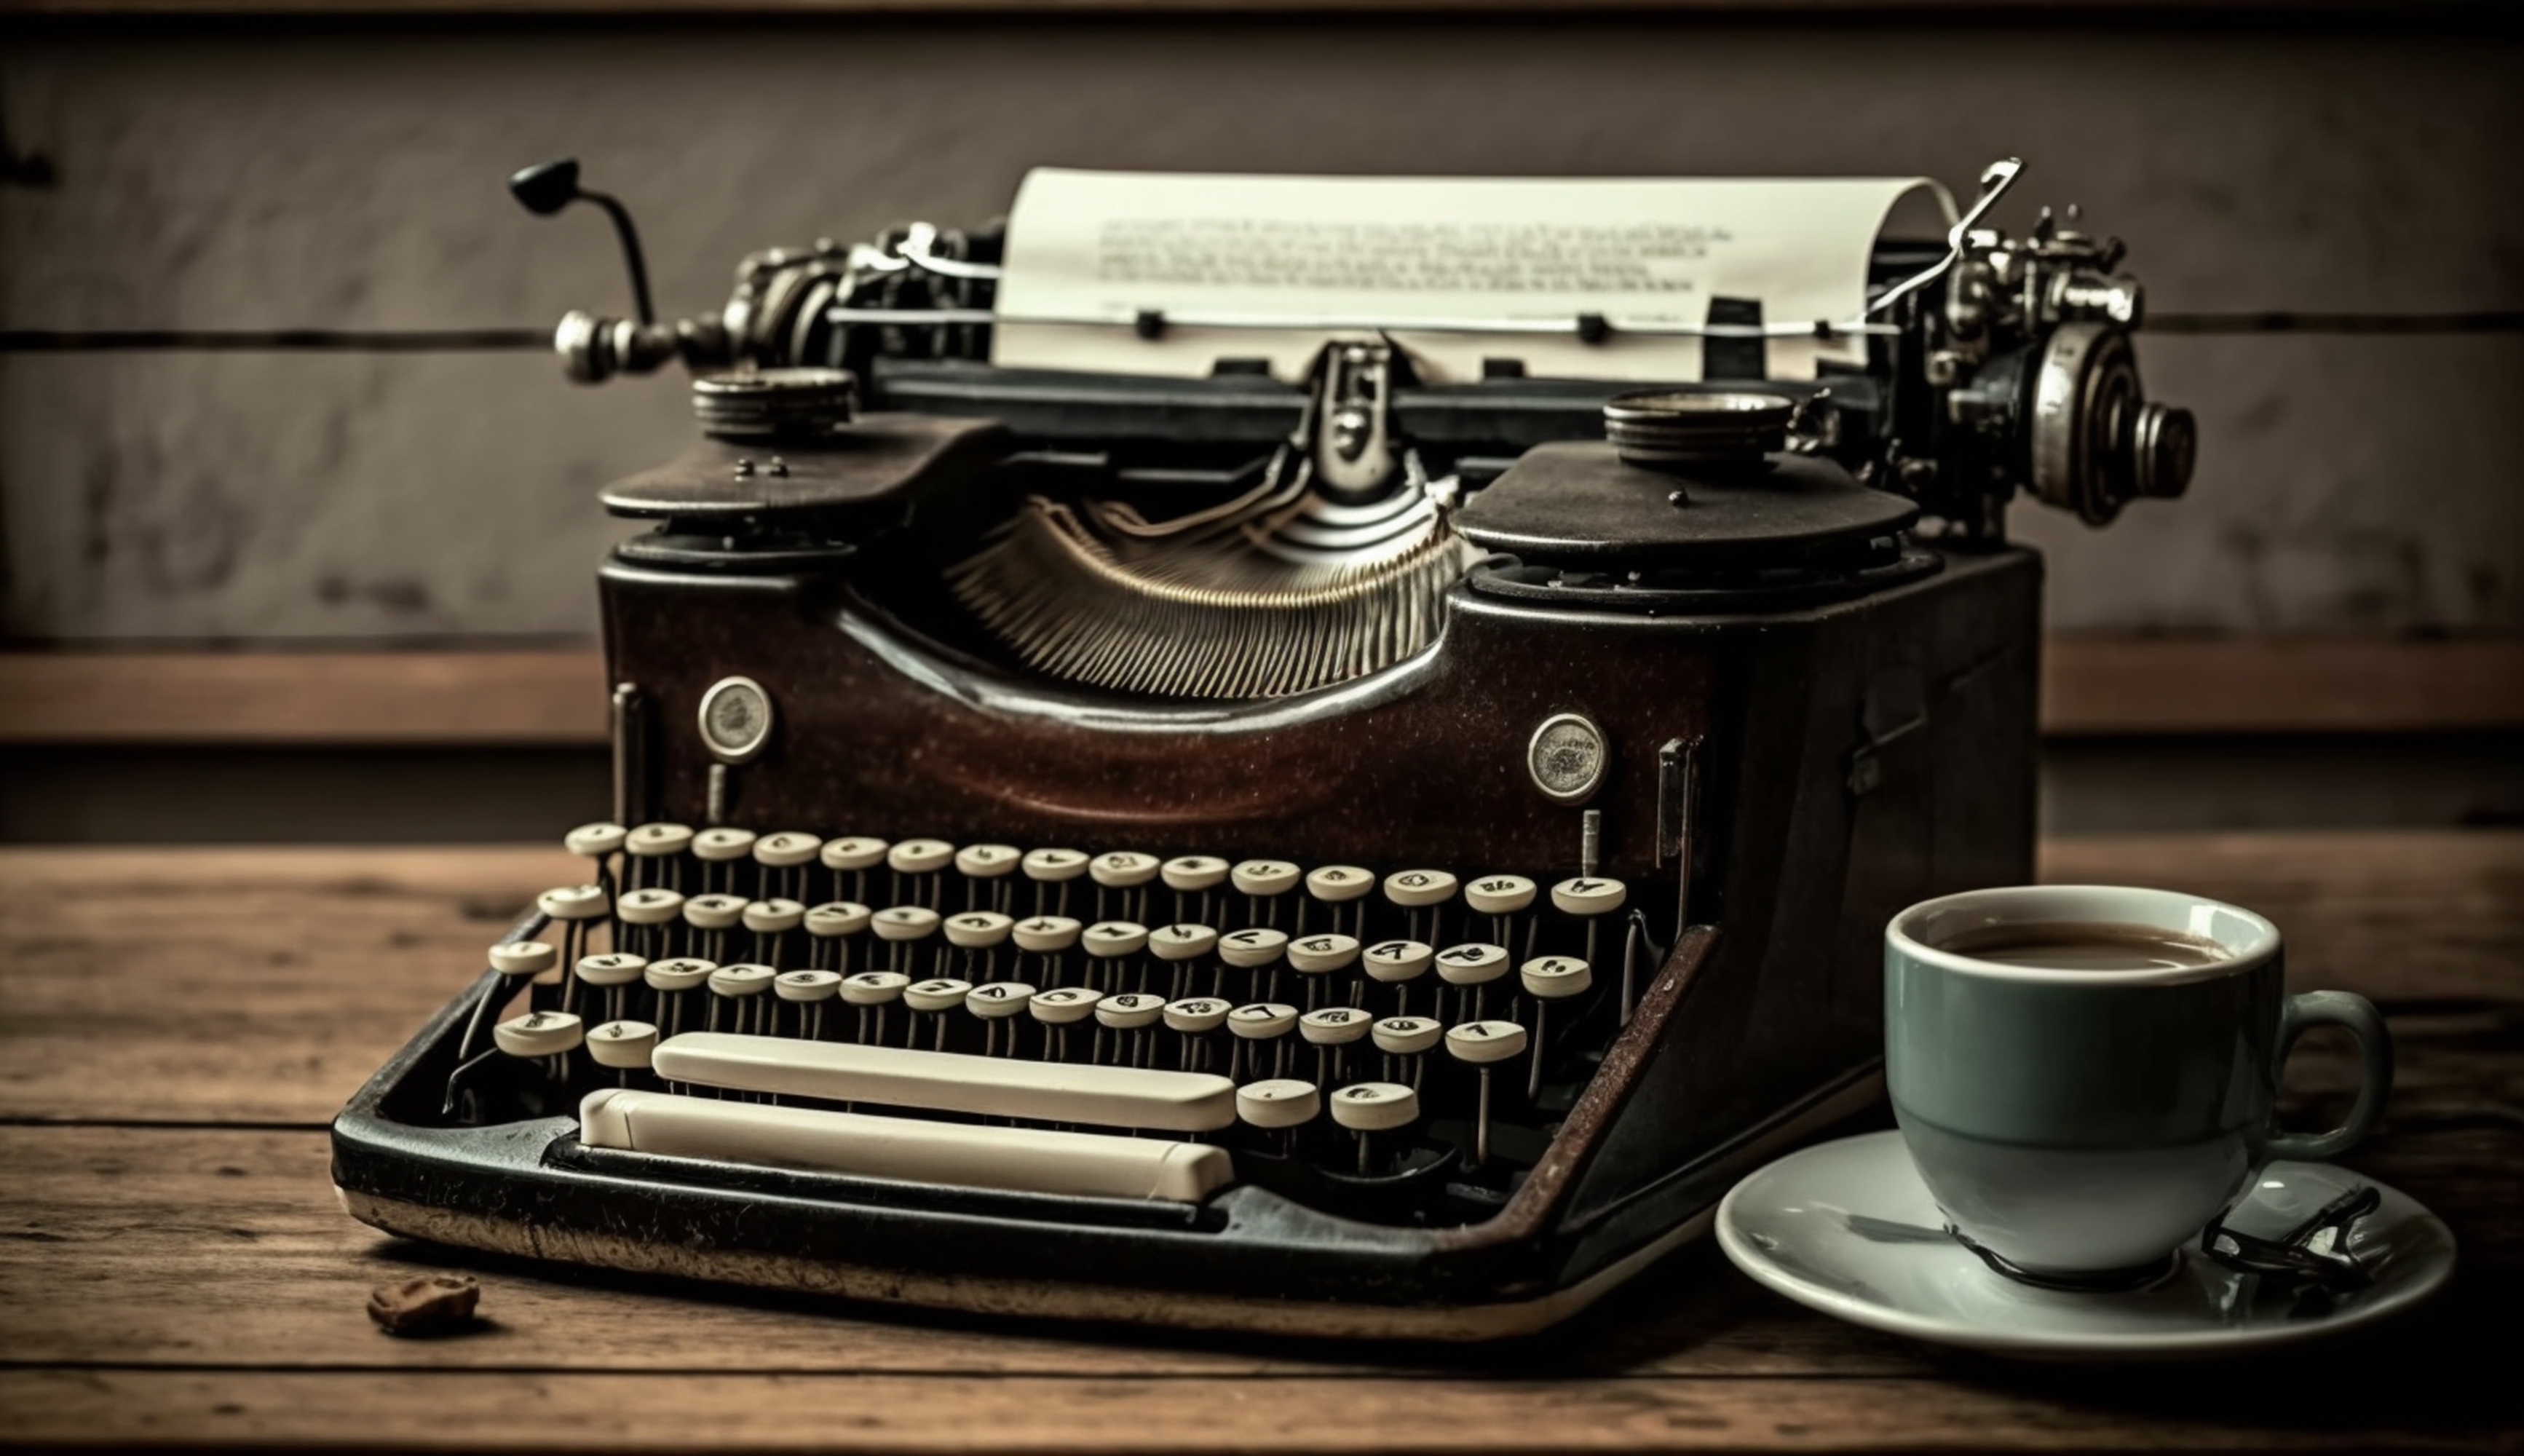 Typewriter and coffee.....HEAVEN